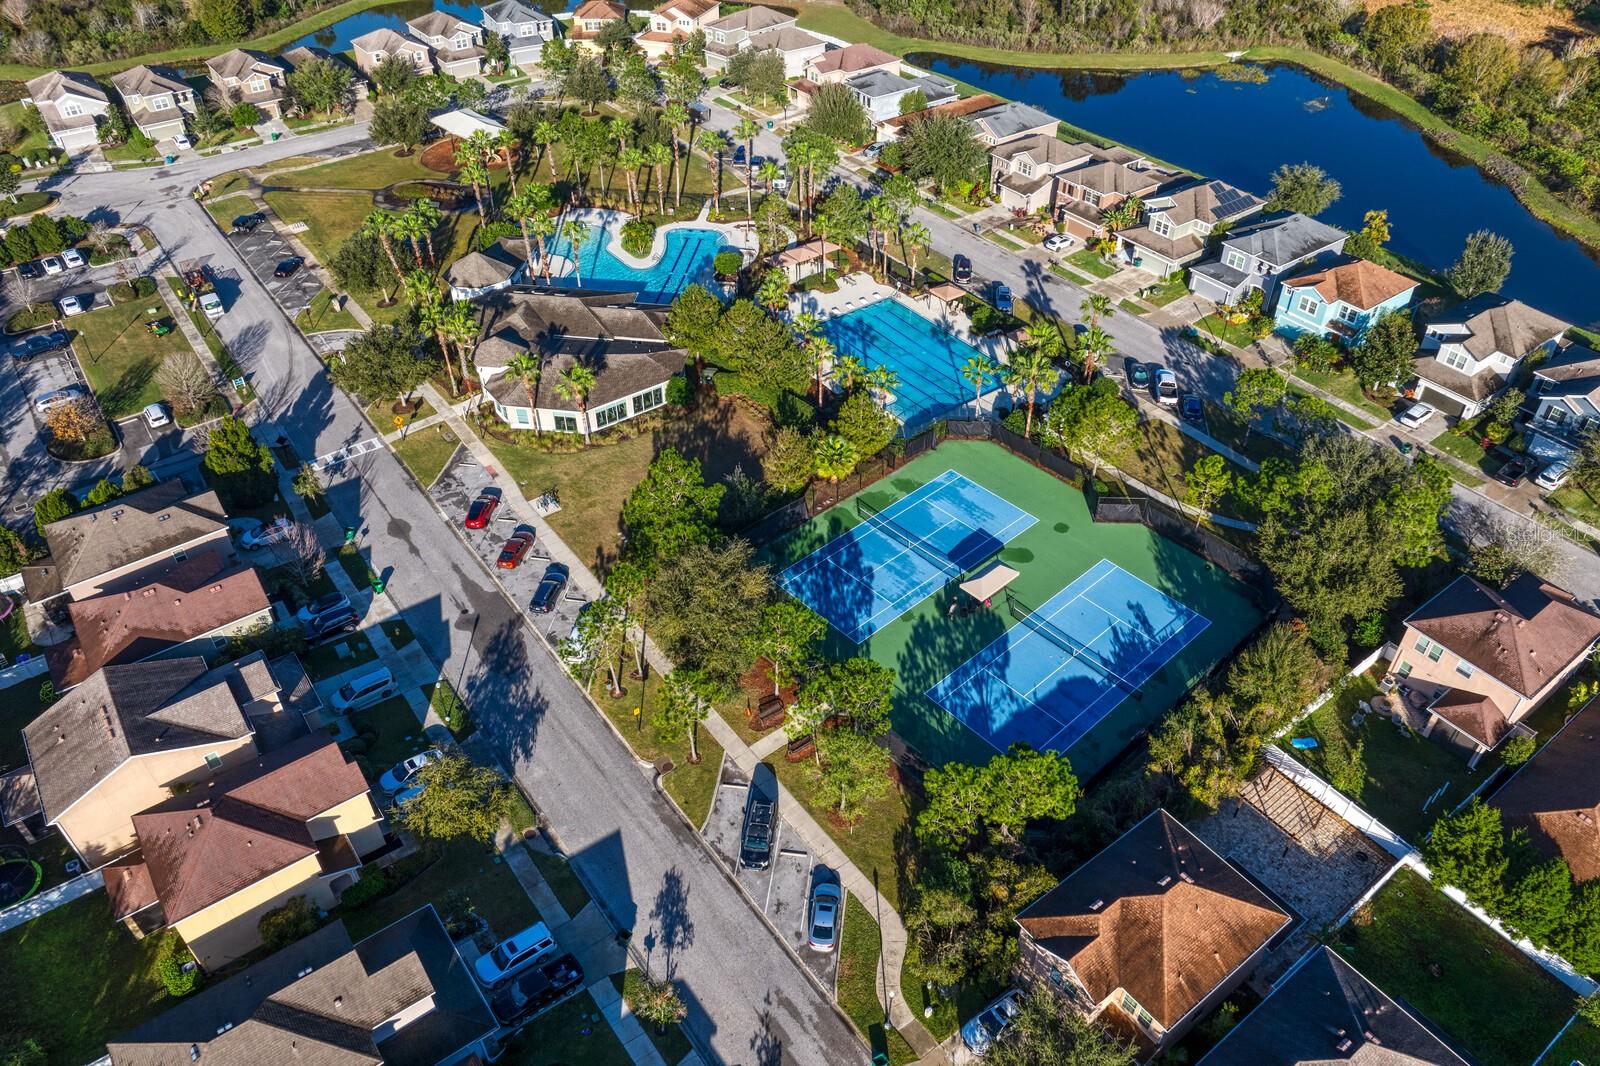 Dont forget to scroll all the way through the photos to see more of the resort-style Watergrass Community!